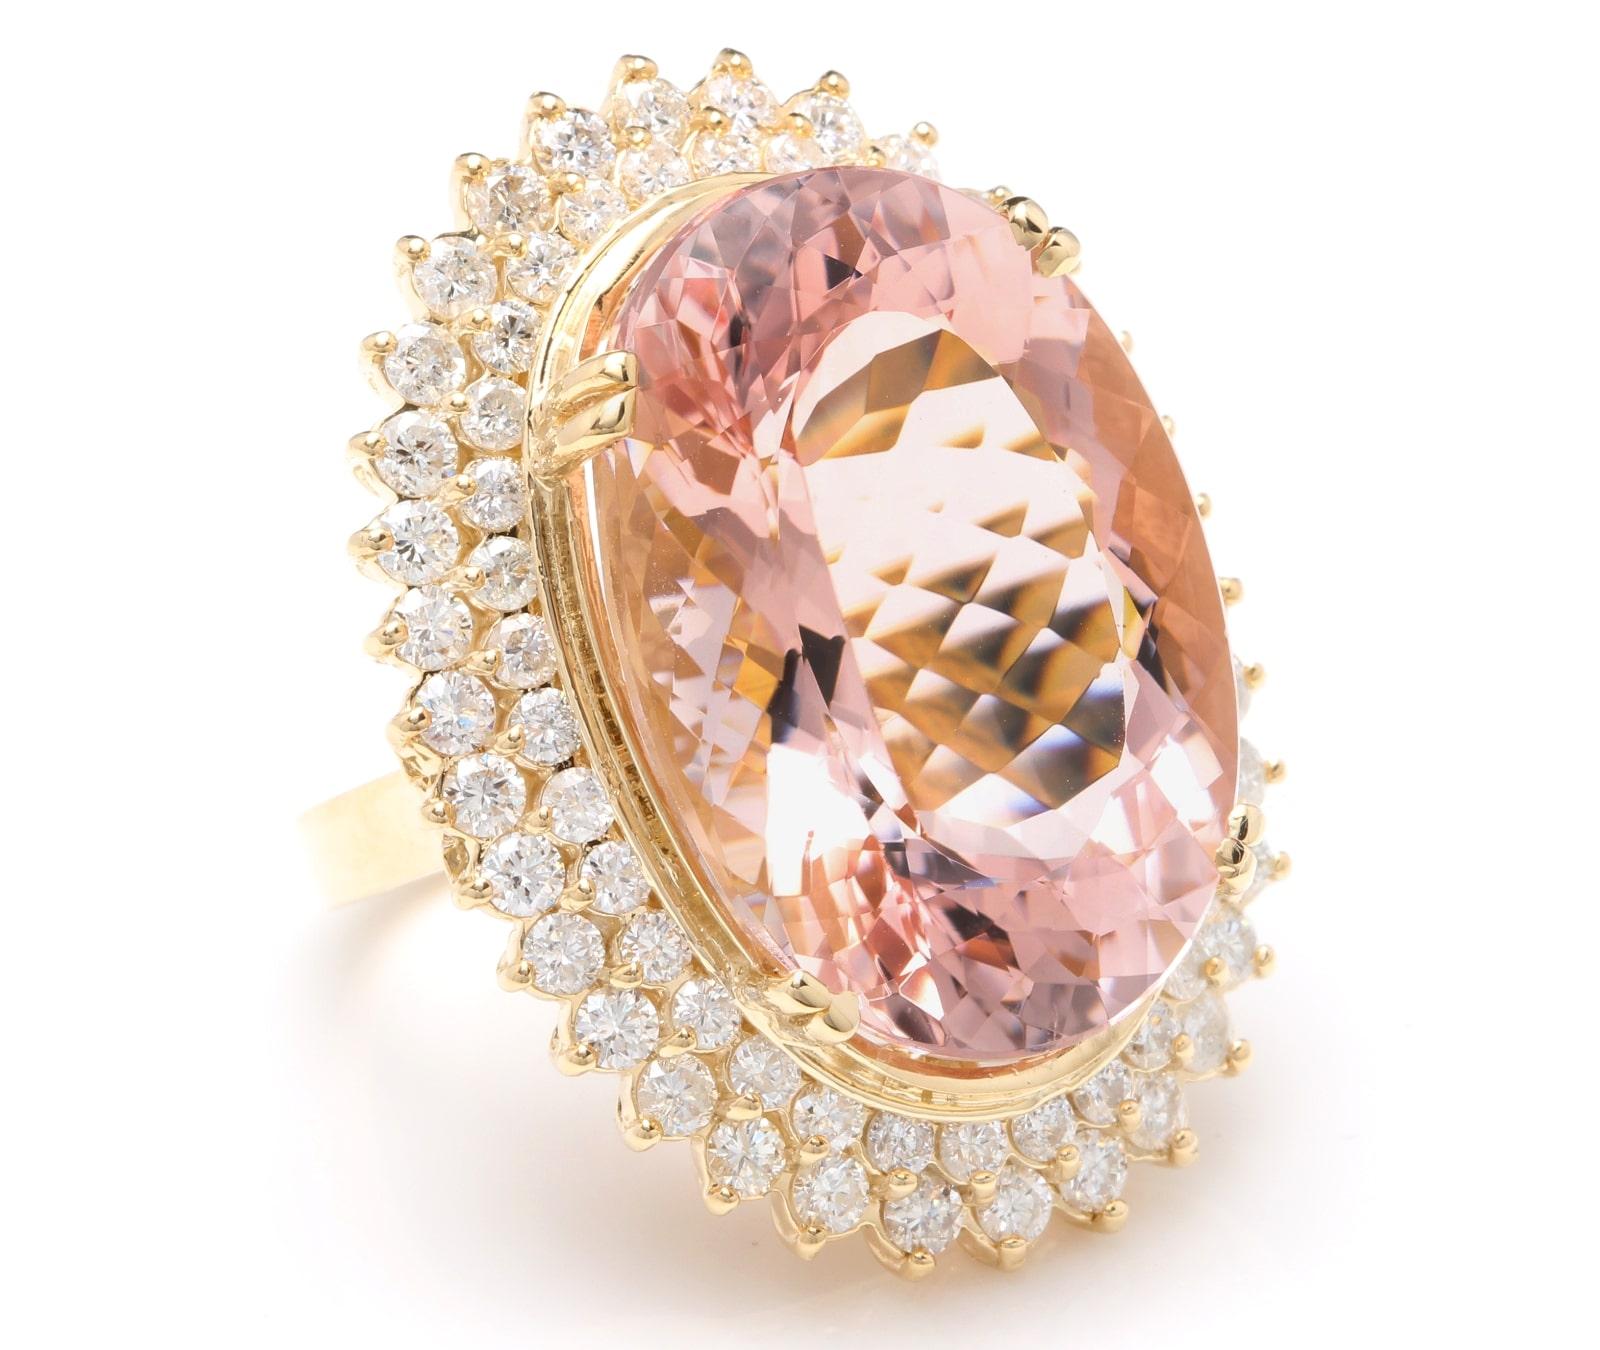 36.25 Carats Exquisite Natural Morganite and Diamond 14K Solid Yellow Gold Ring

Suggested Replacement Value: 15,000.00

Total Natural Oval Morganite Weight is: Approx. 33.00 Carats 

Morganite Measures: 26.00 x 18.00mm

Natural Round Diamonds